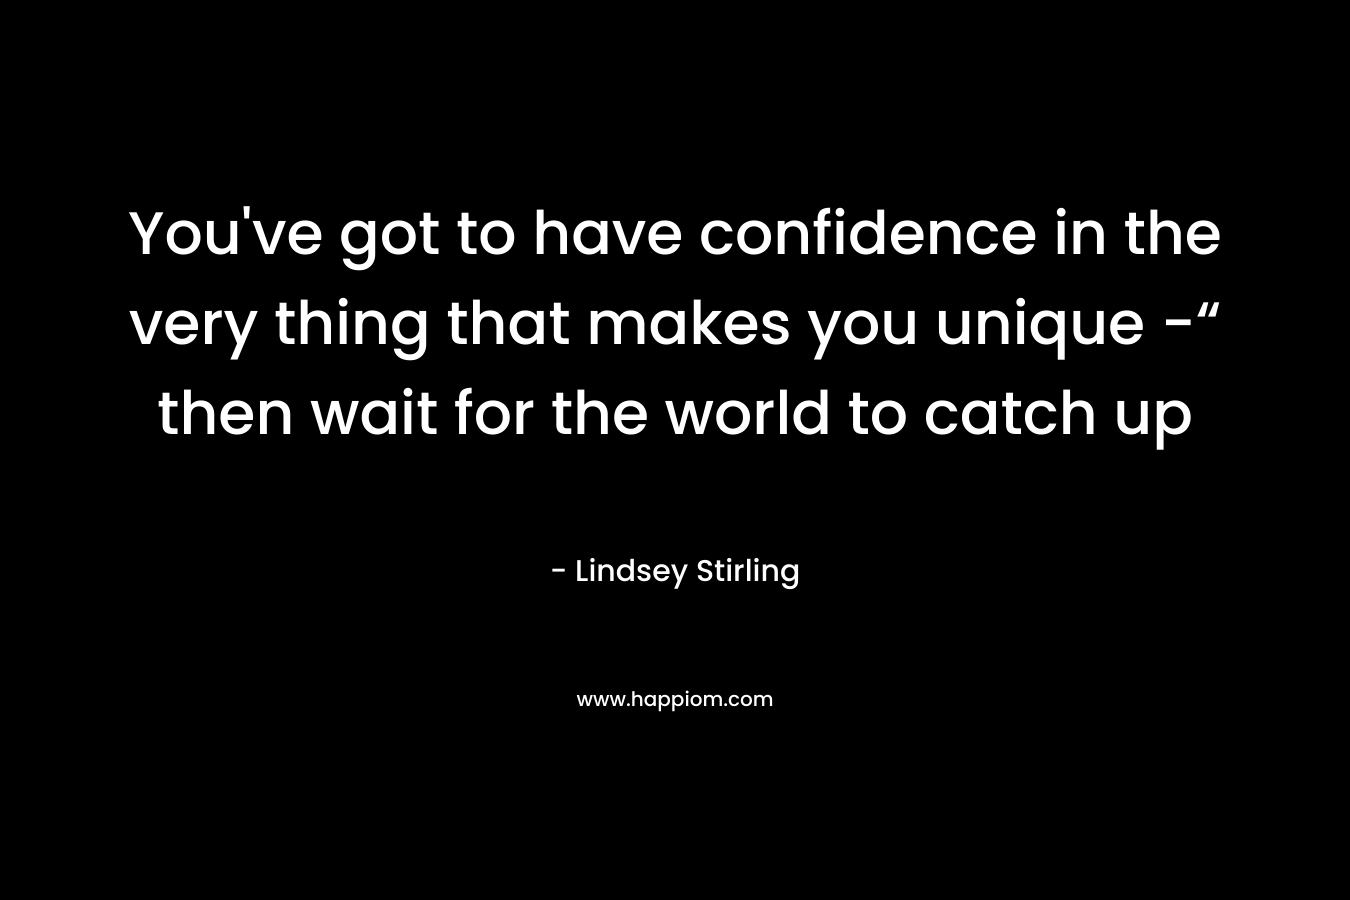 You've got to have confidence in the very thing that makes you unique -“ then wait for the world to catch up